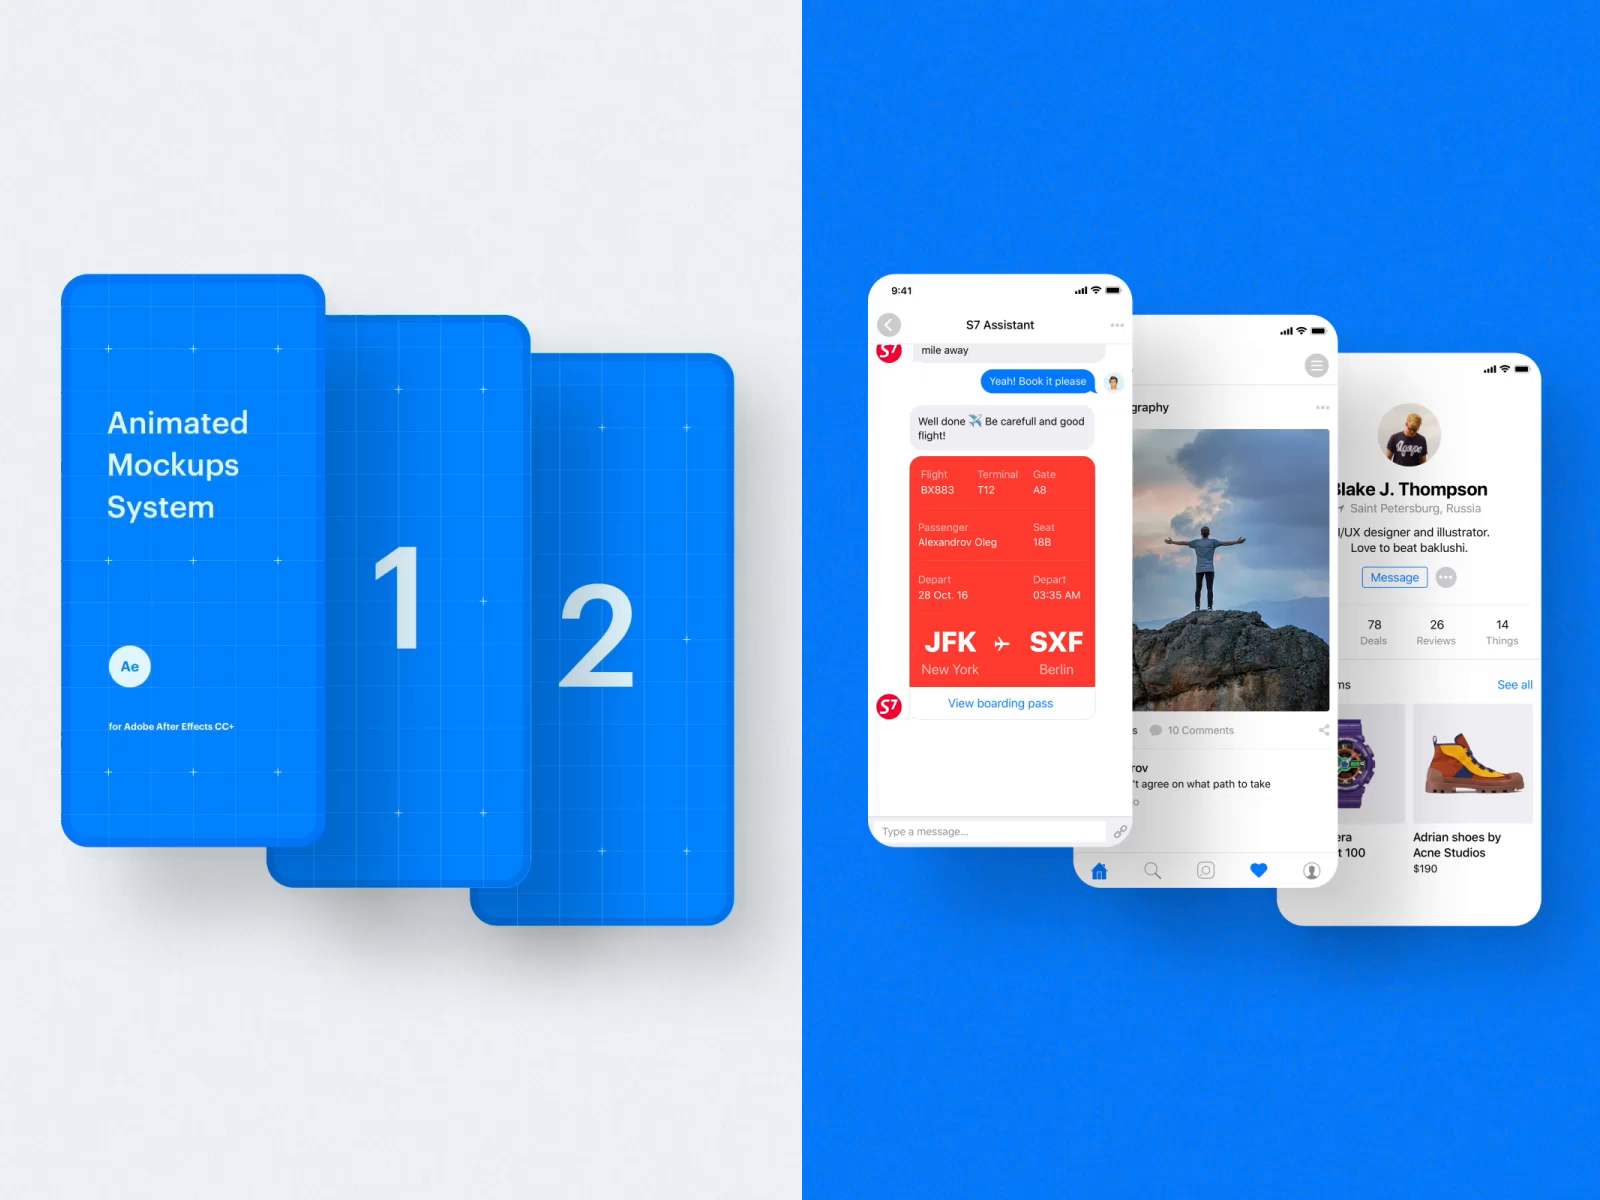 Download Animated Mockup System I by Anton Tkachev for UI8 on Dribbble